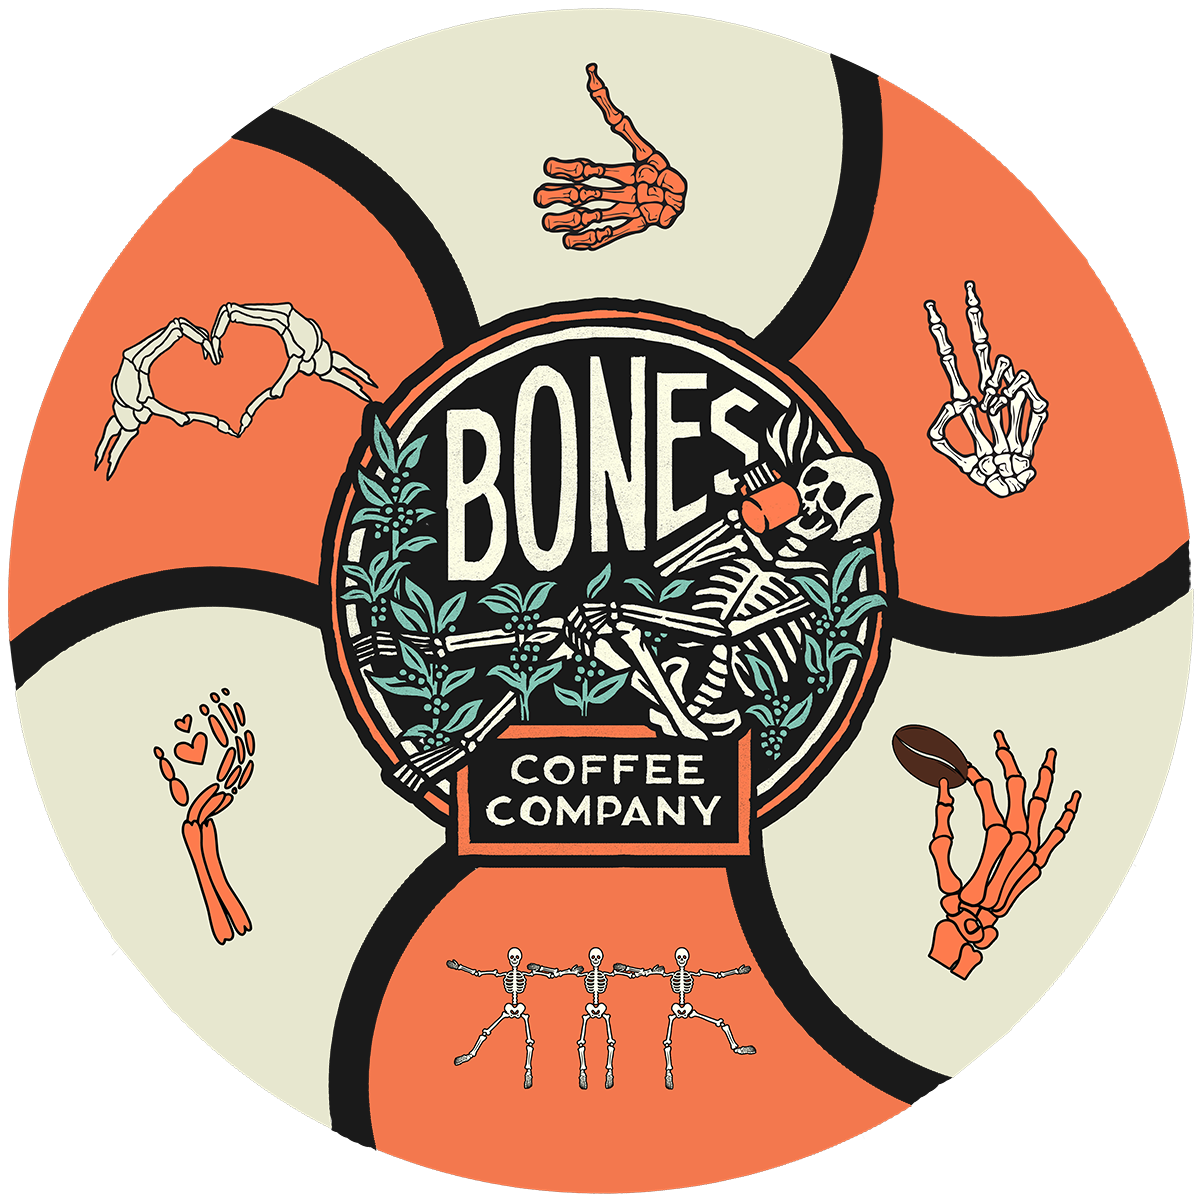 A circle with the Bones Coffee Company logo in the center. There are three skeletons dancing together and skeletal hands giving a peace sign, heart sign, thumbs up, with hearts coming out of its palm, and pinching a coffee bean around the circle.